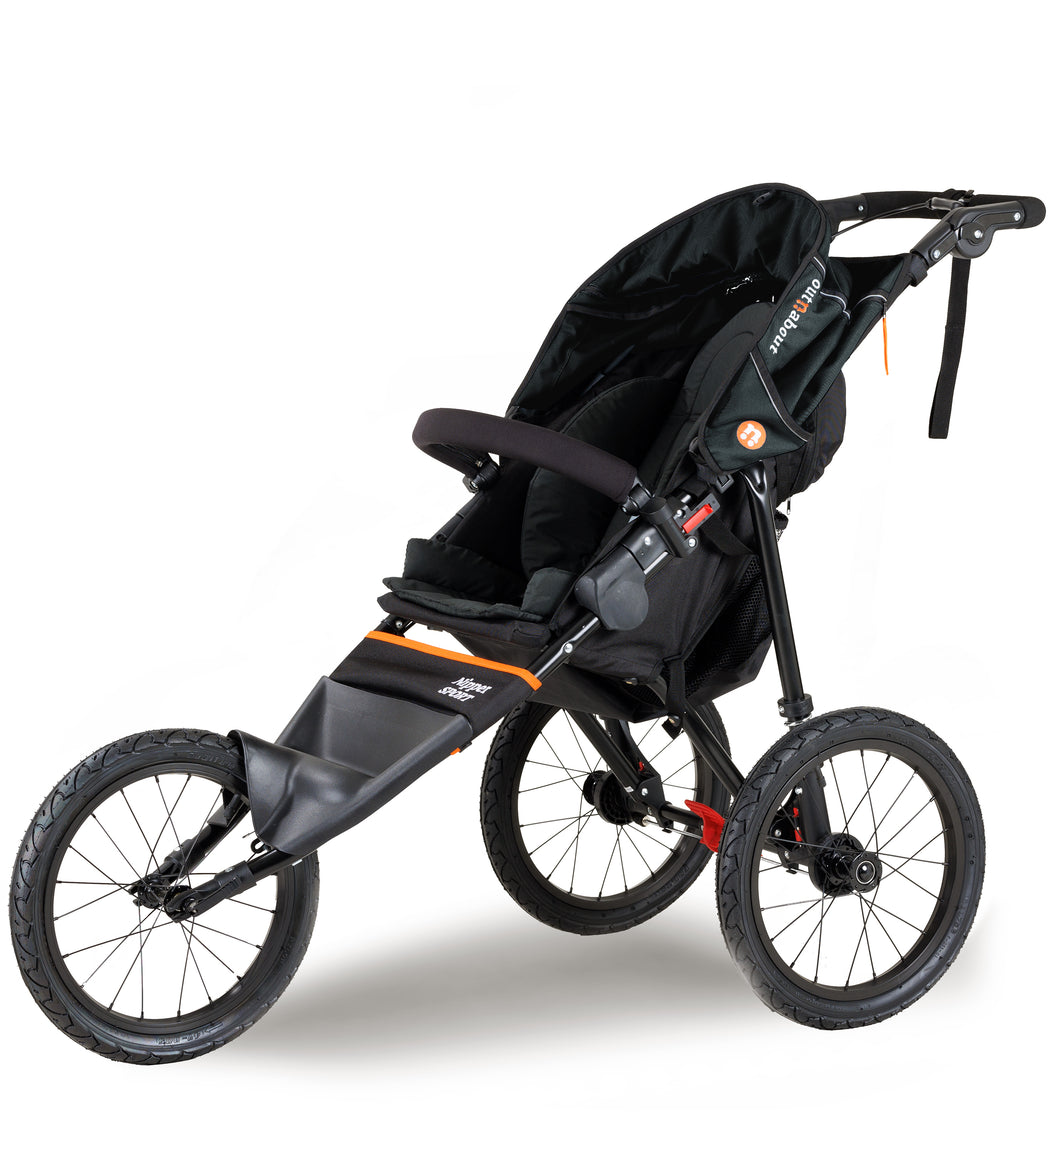 HIRE Out 'n' About Nipper Sport v5 - Single